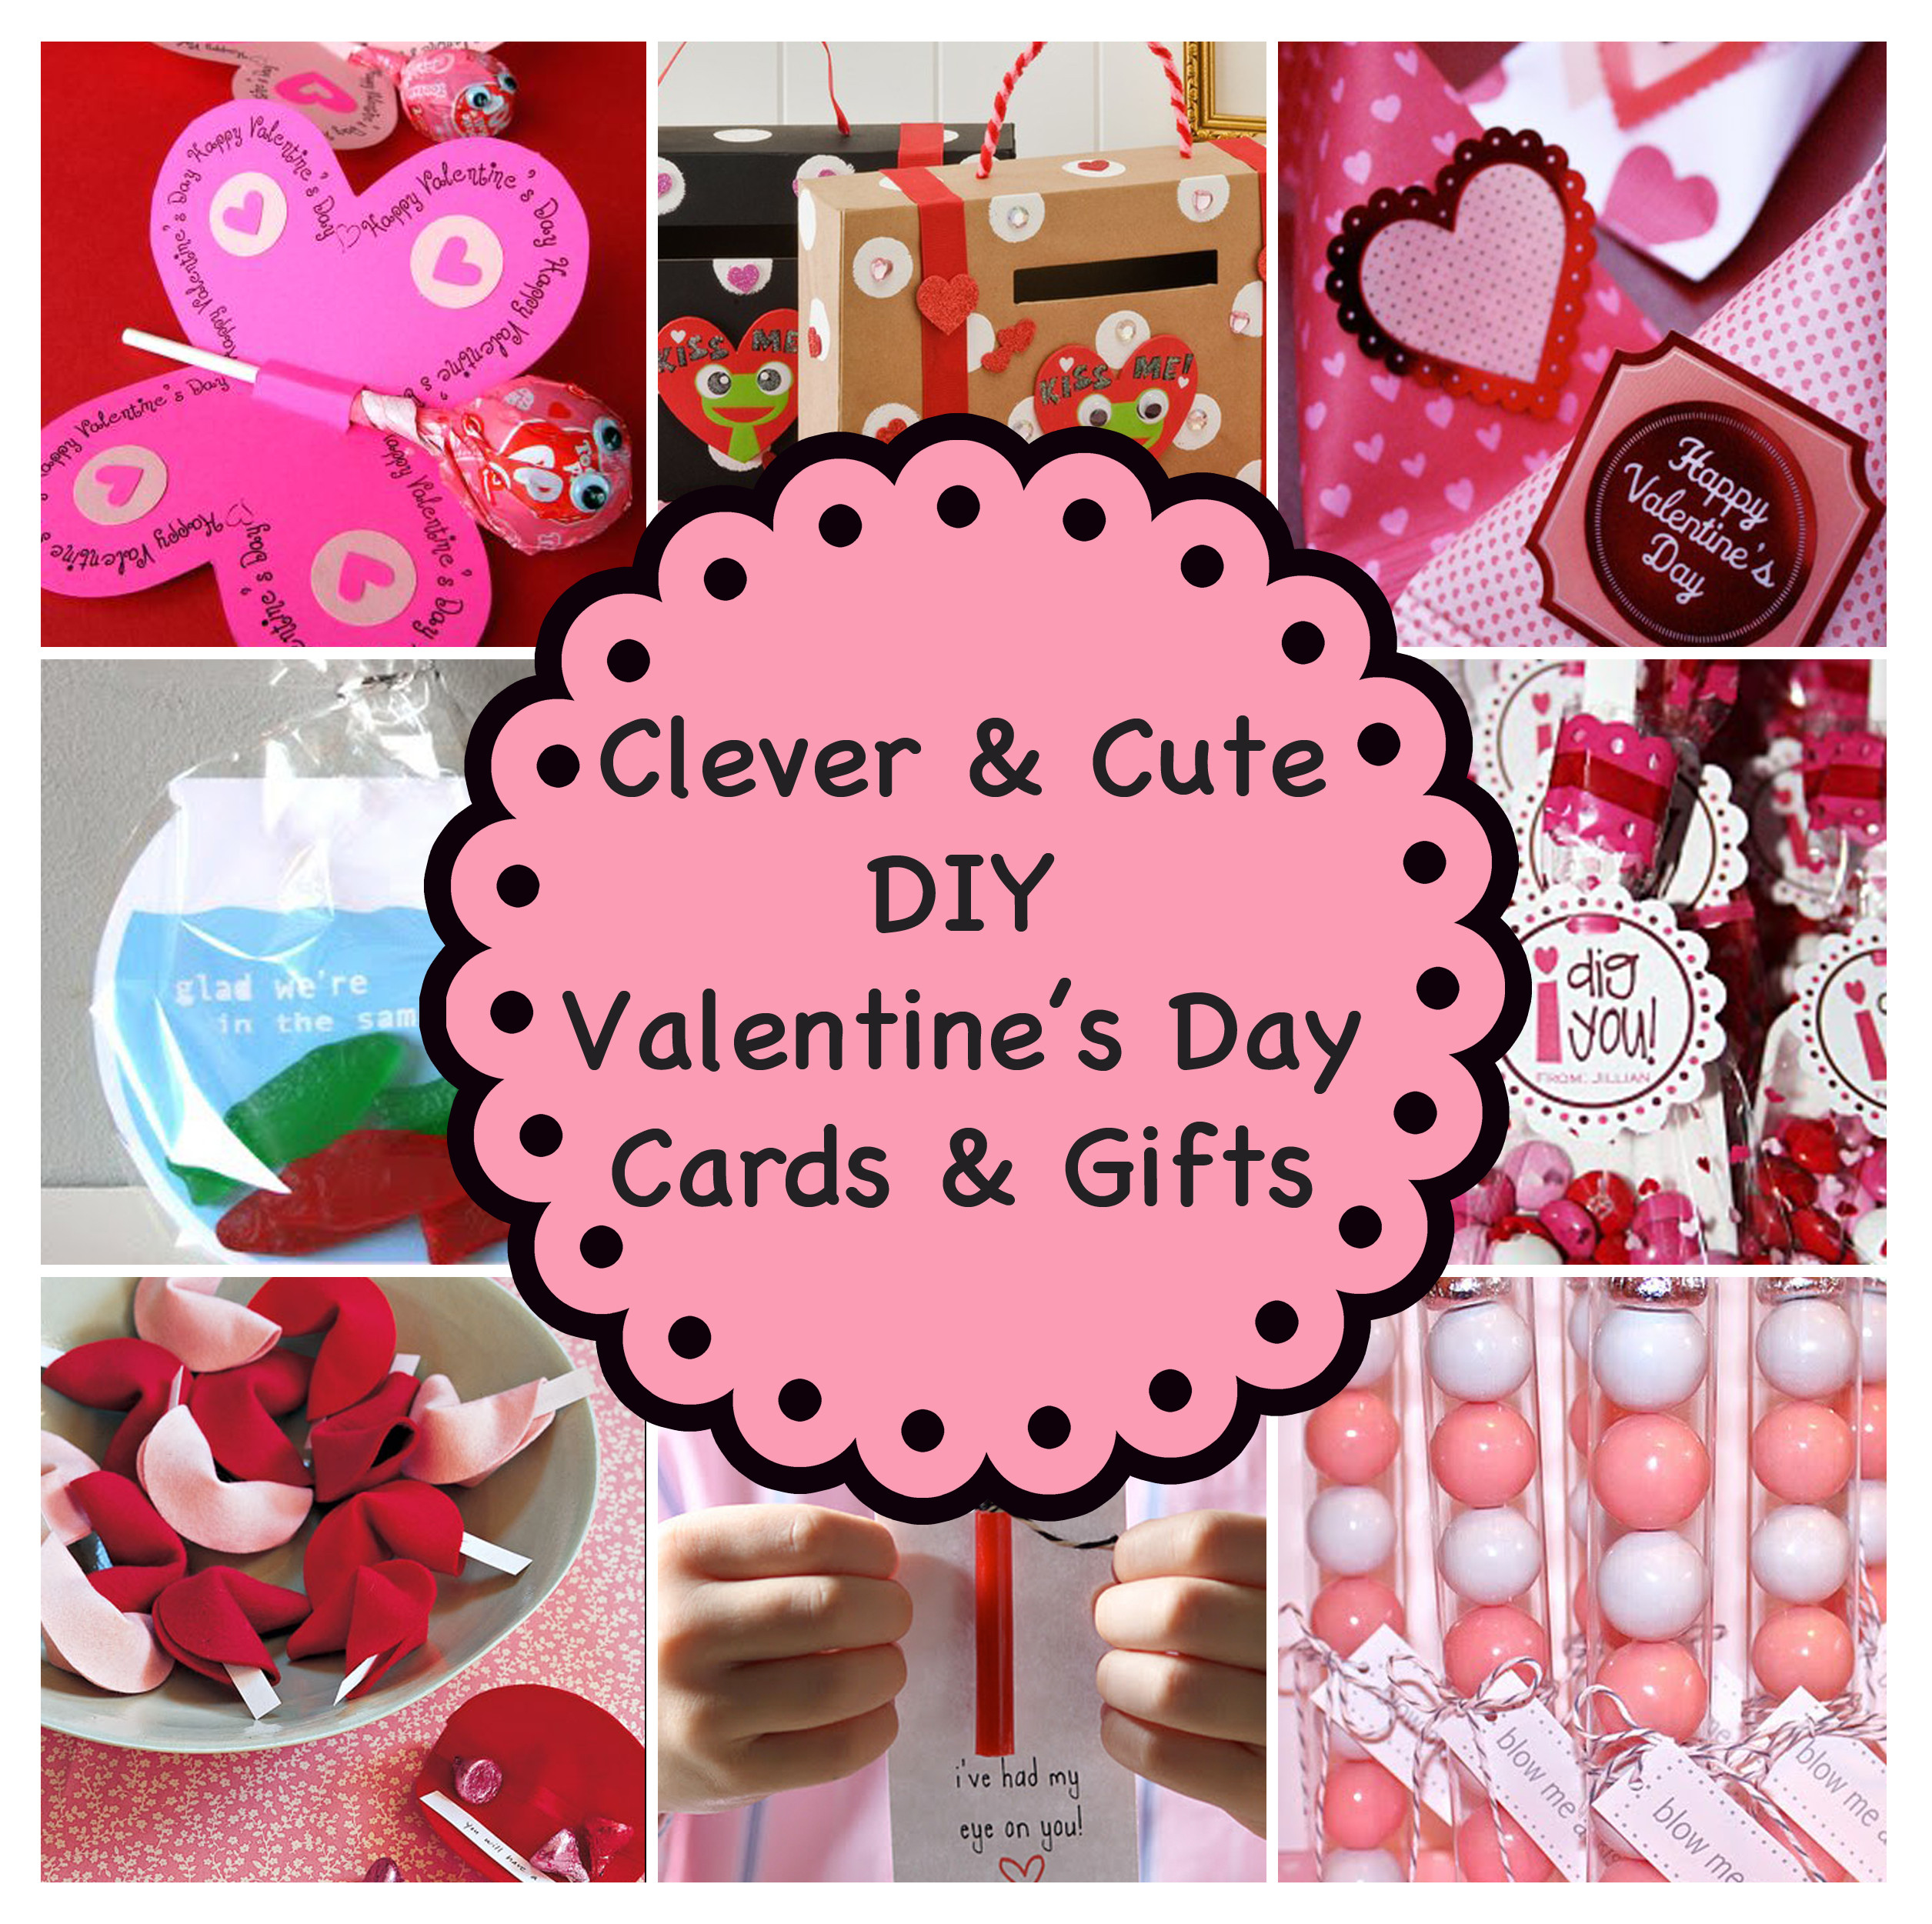 Valentines Day Gifts Cards Unique Clever and Cute Diy Valentine’s Day Cards &amp; Gifts